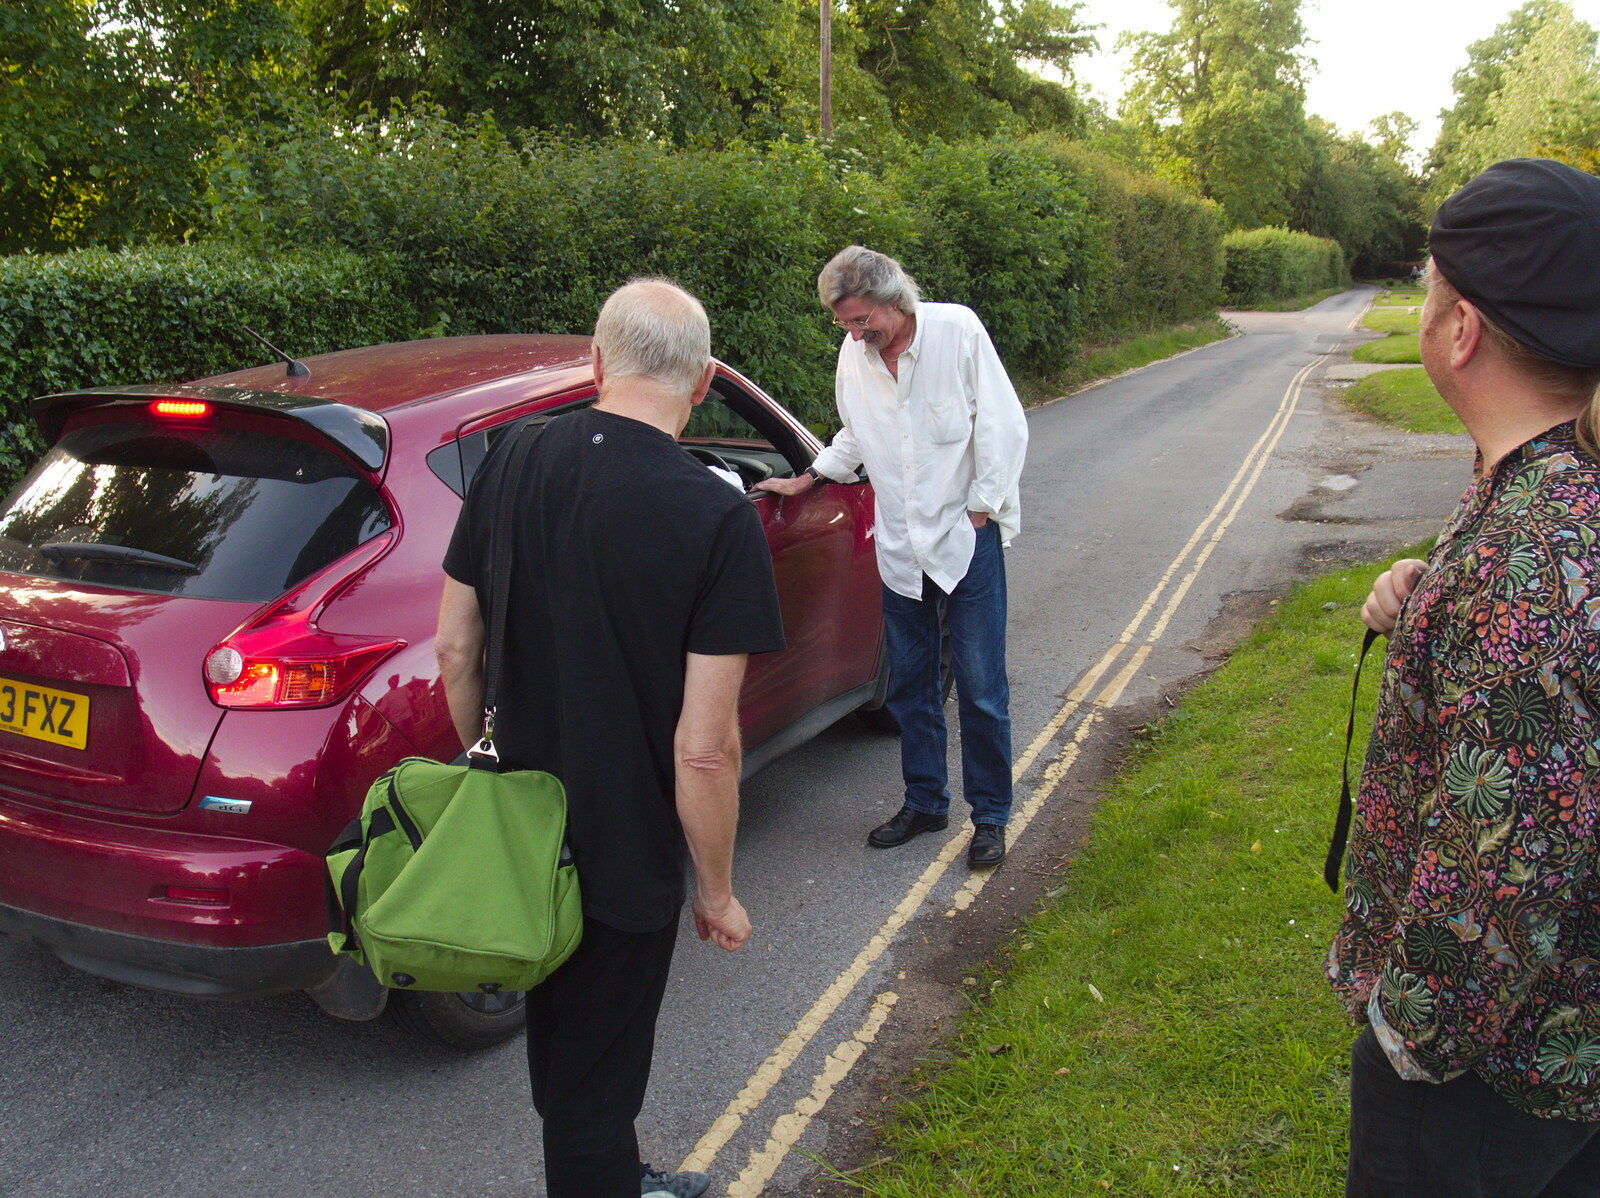 Rob chats to someone in a passing car from The BBs at Diss Rugby Club, Bellrope Lane, Roydon, Norfolk - 7th June 2014